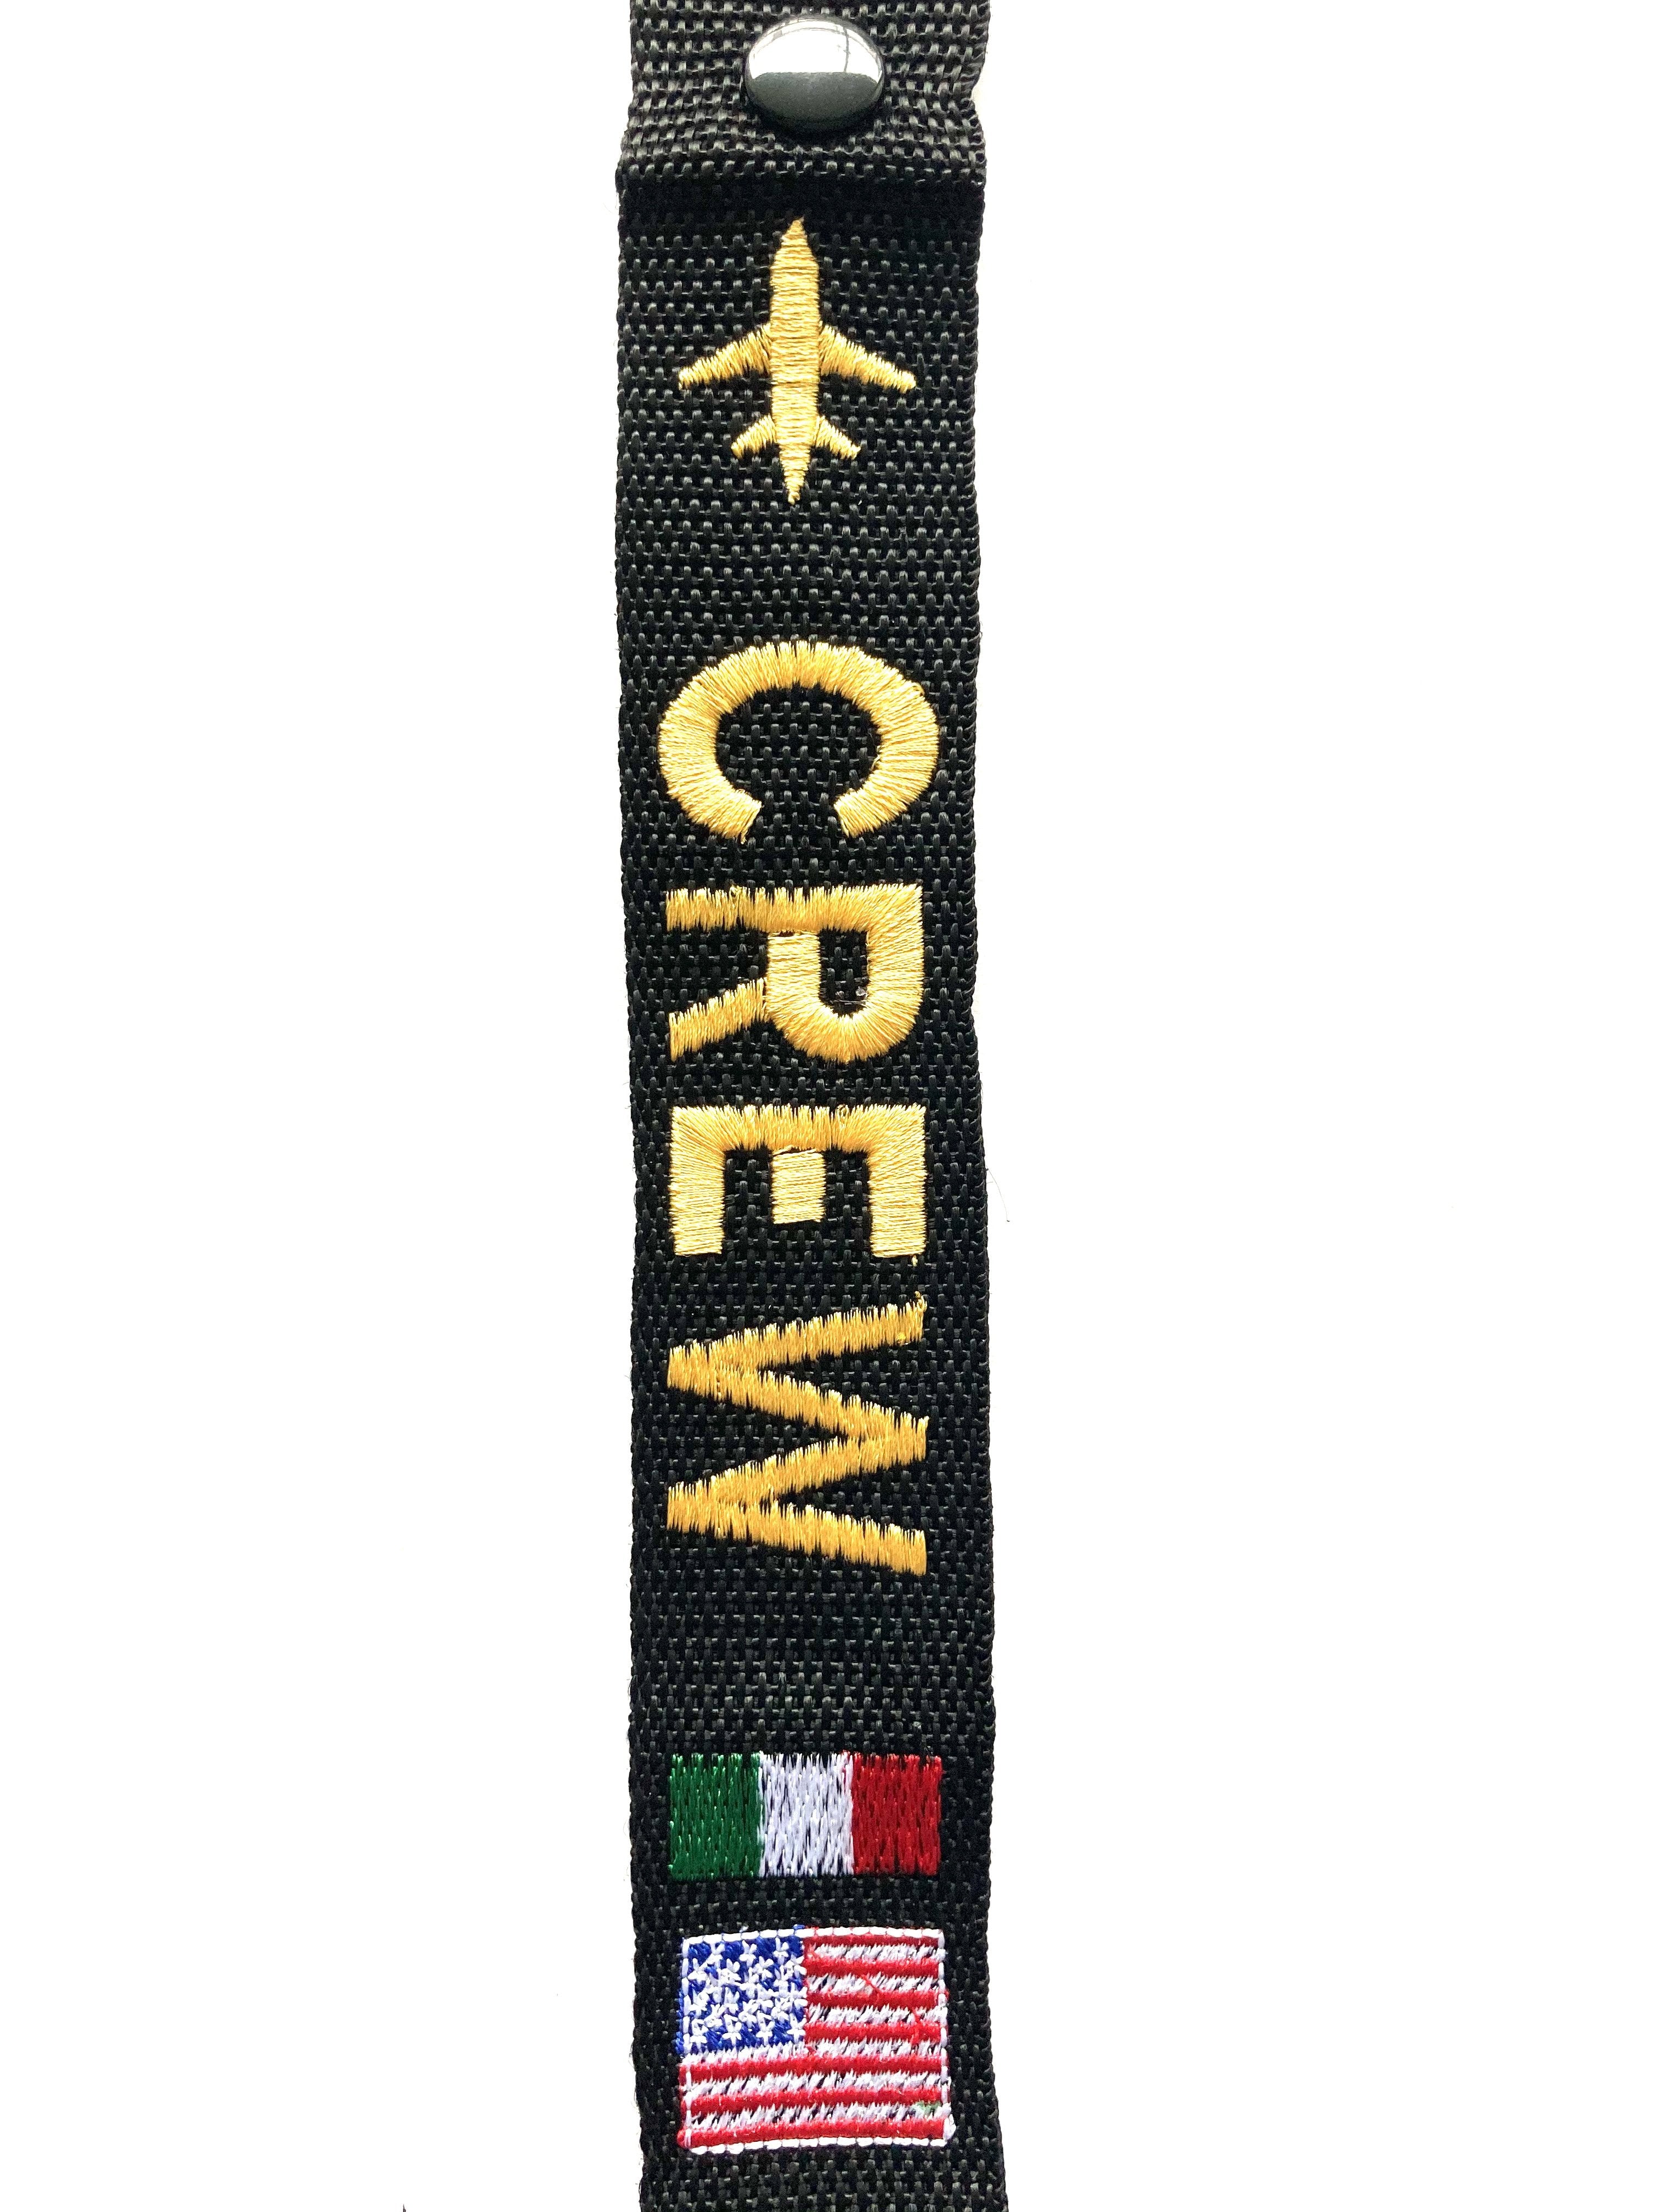 Crew & Flags - ITALY & USA Crew Luggage Tag